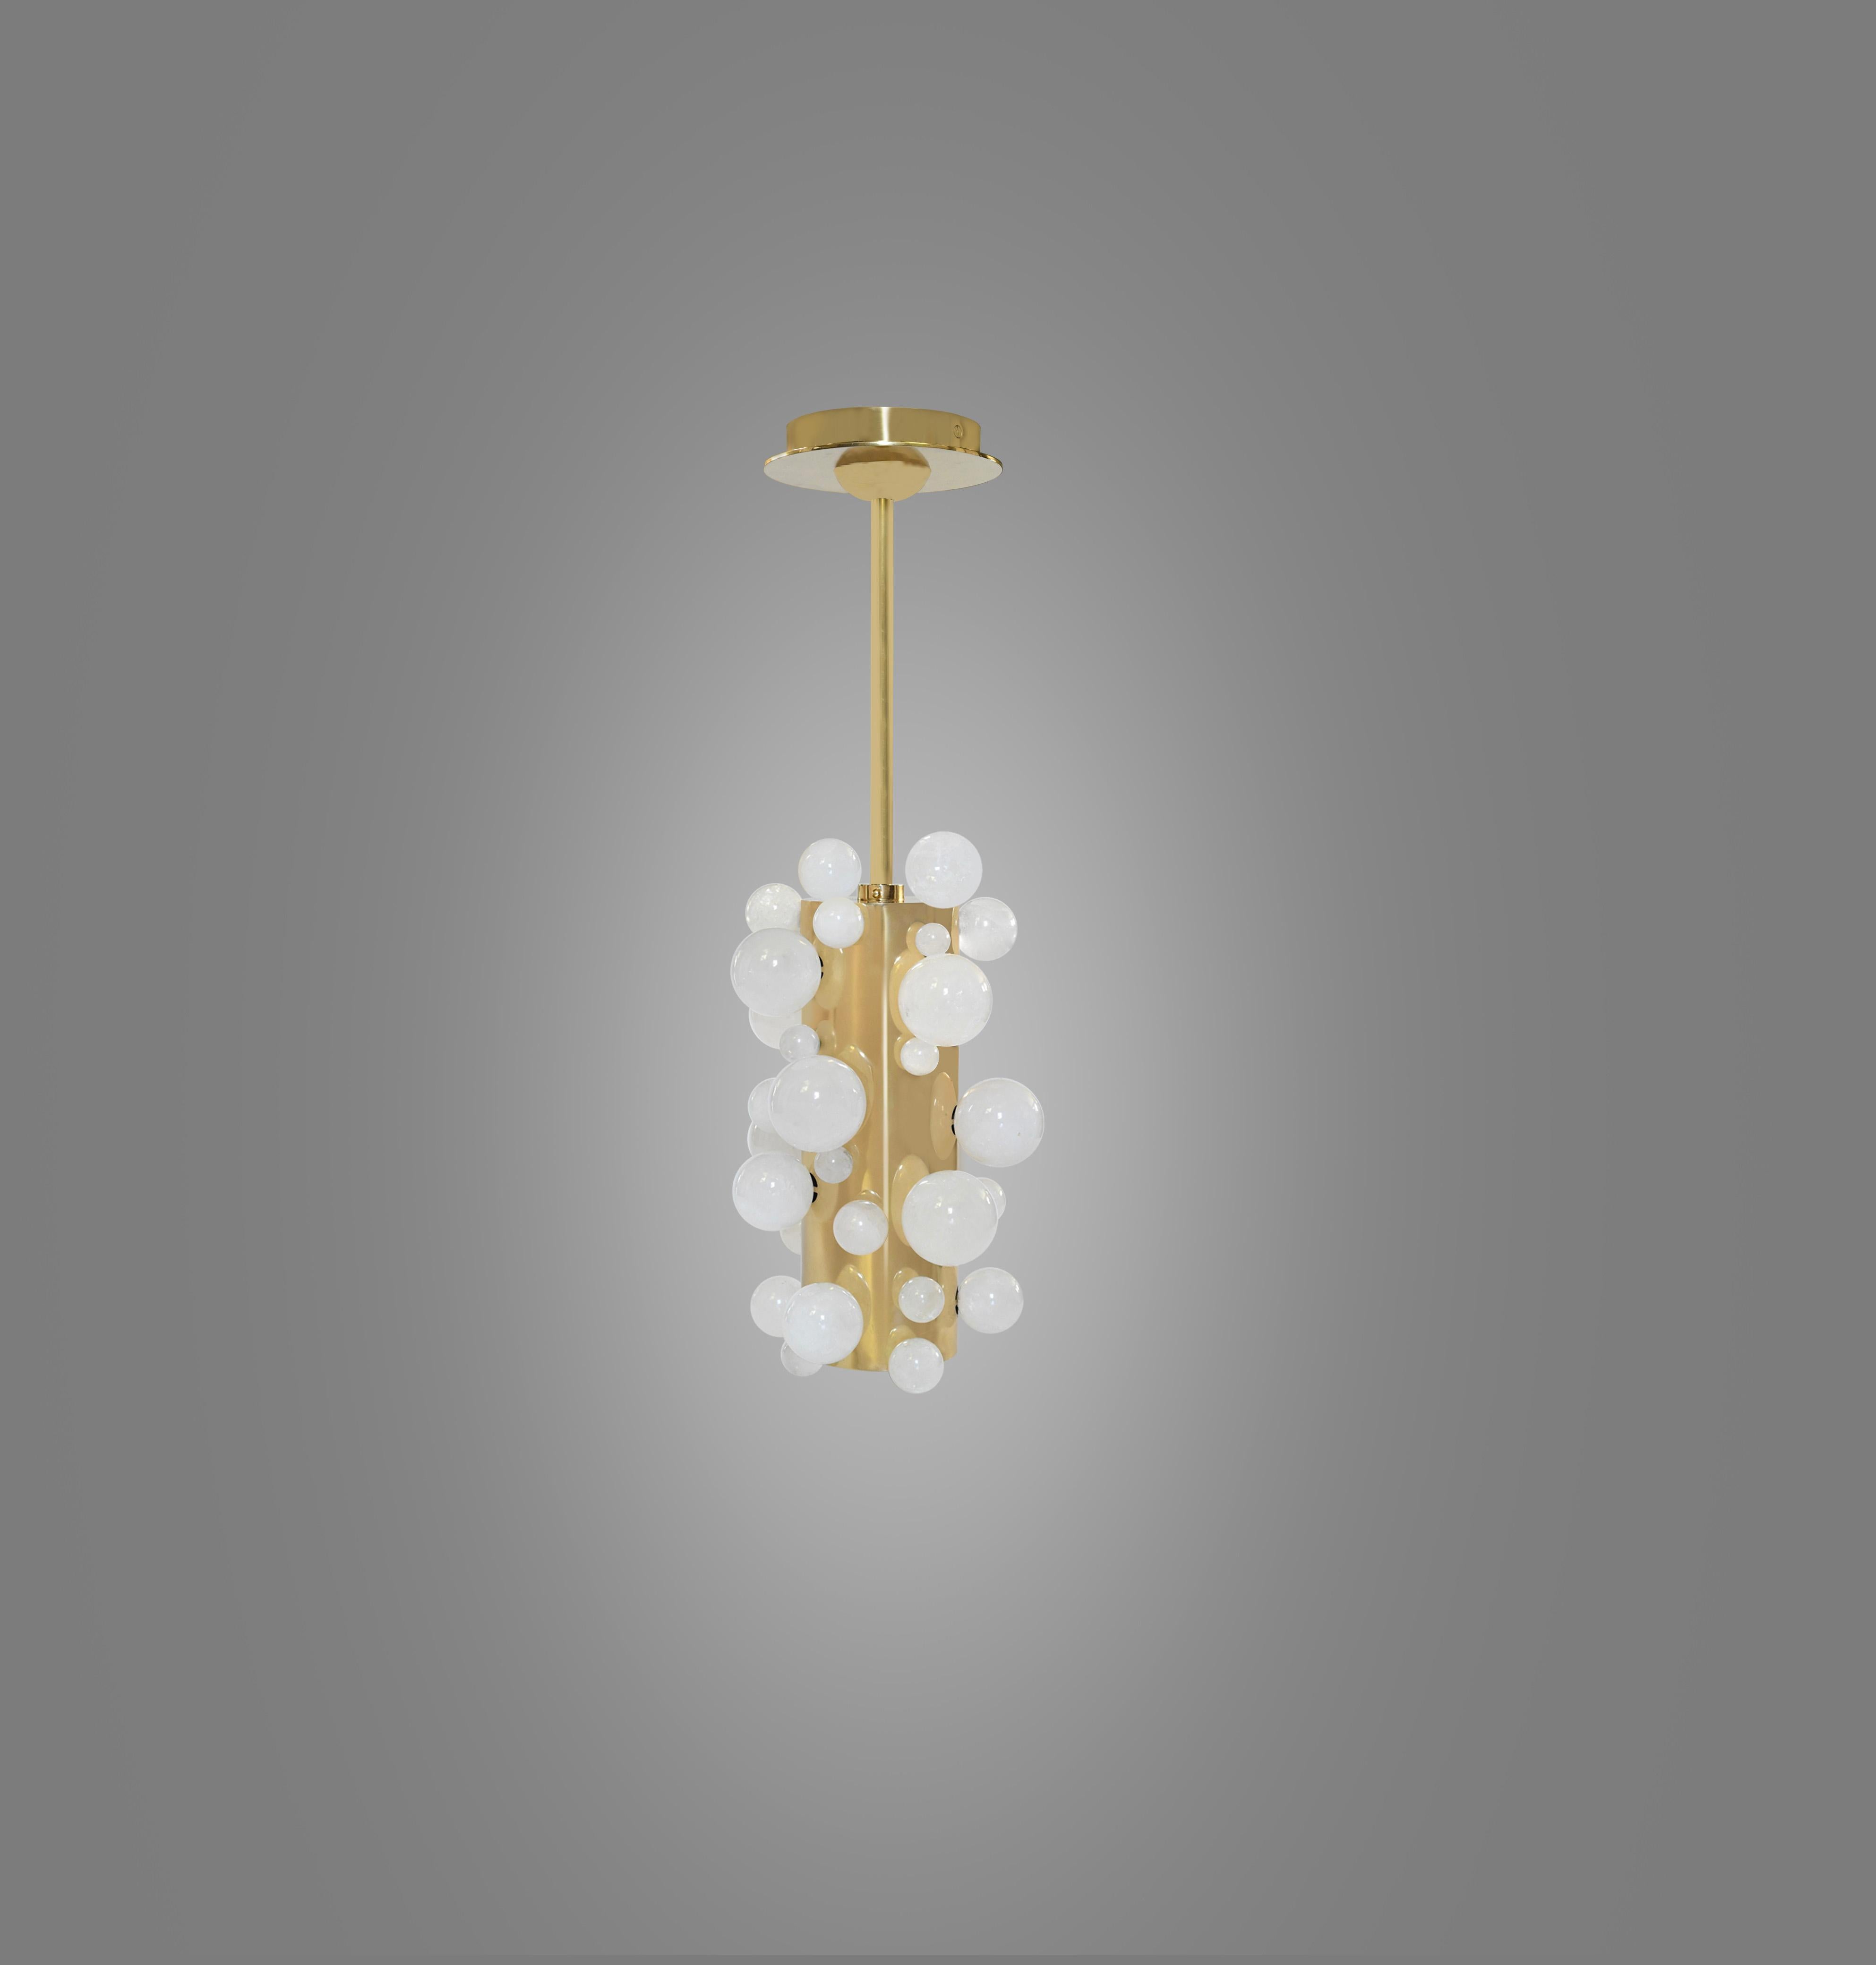 Rock crystal bubble pendant light with polished brass finish. Created by Phoenix Gallery, NYC.
Two sockets installed. Use LED warm light bulbs. 50w each. 100 w total.
Dimension of the pendant: 8